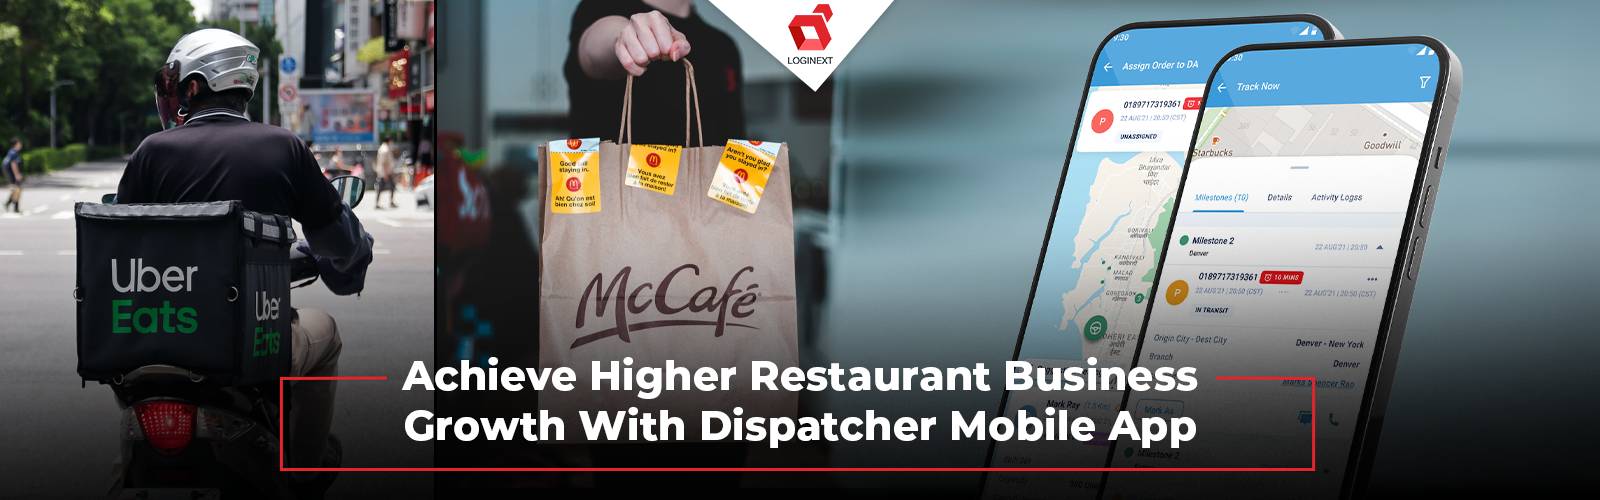 Gain Higher Restaurant Business Growth With Dispatcher Mobile App